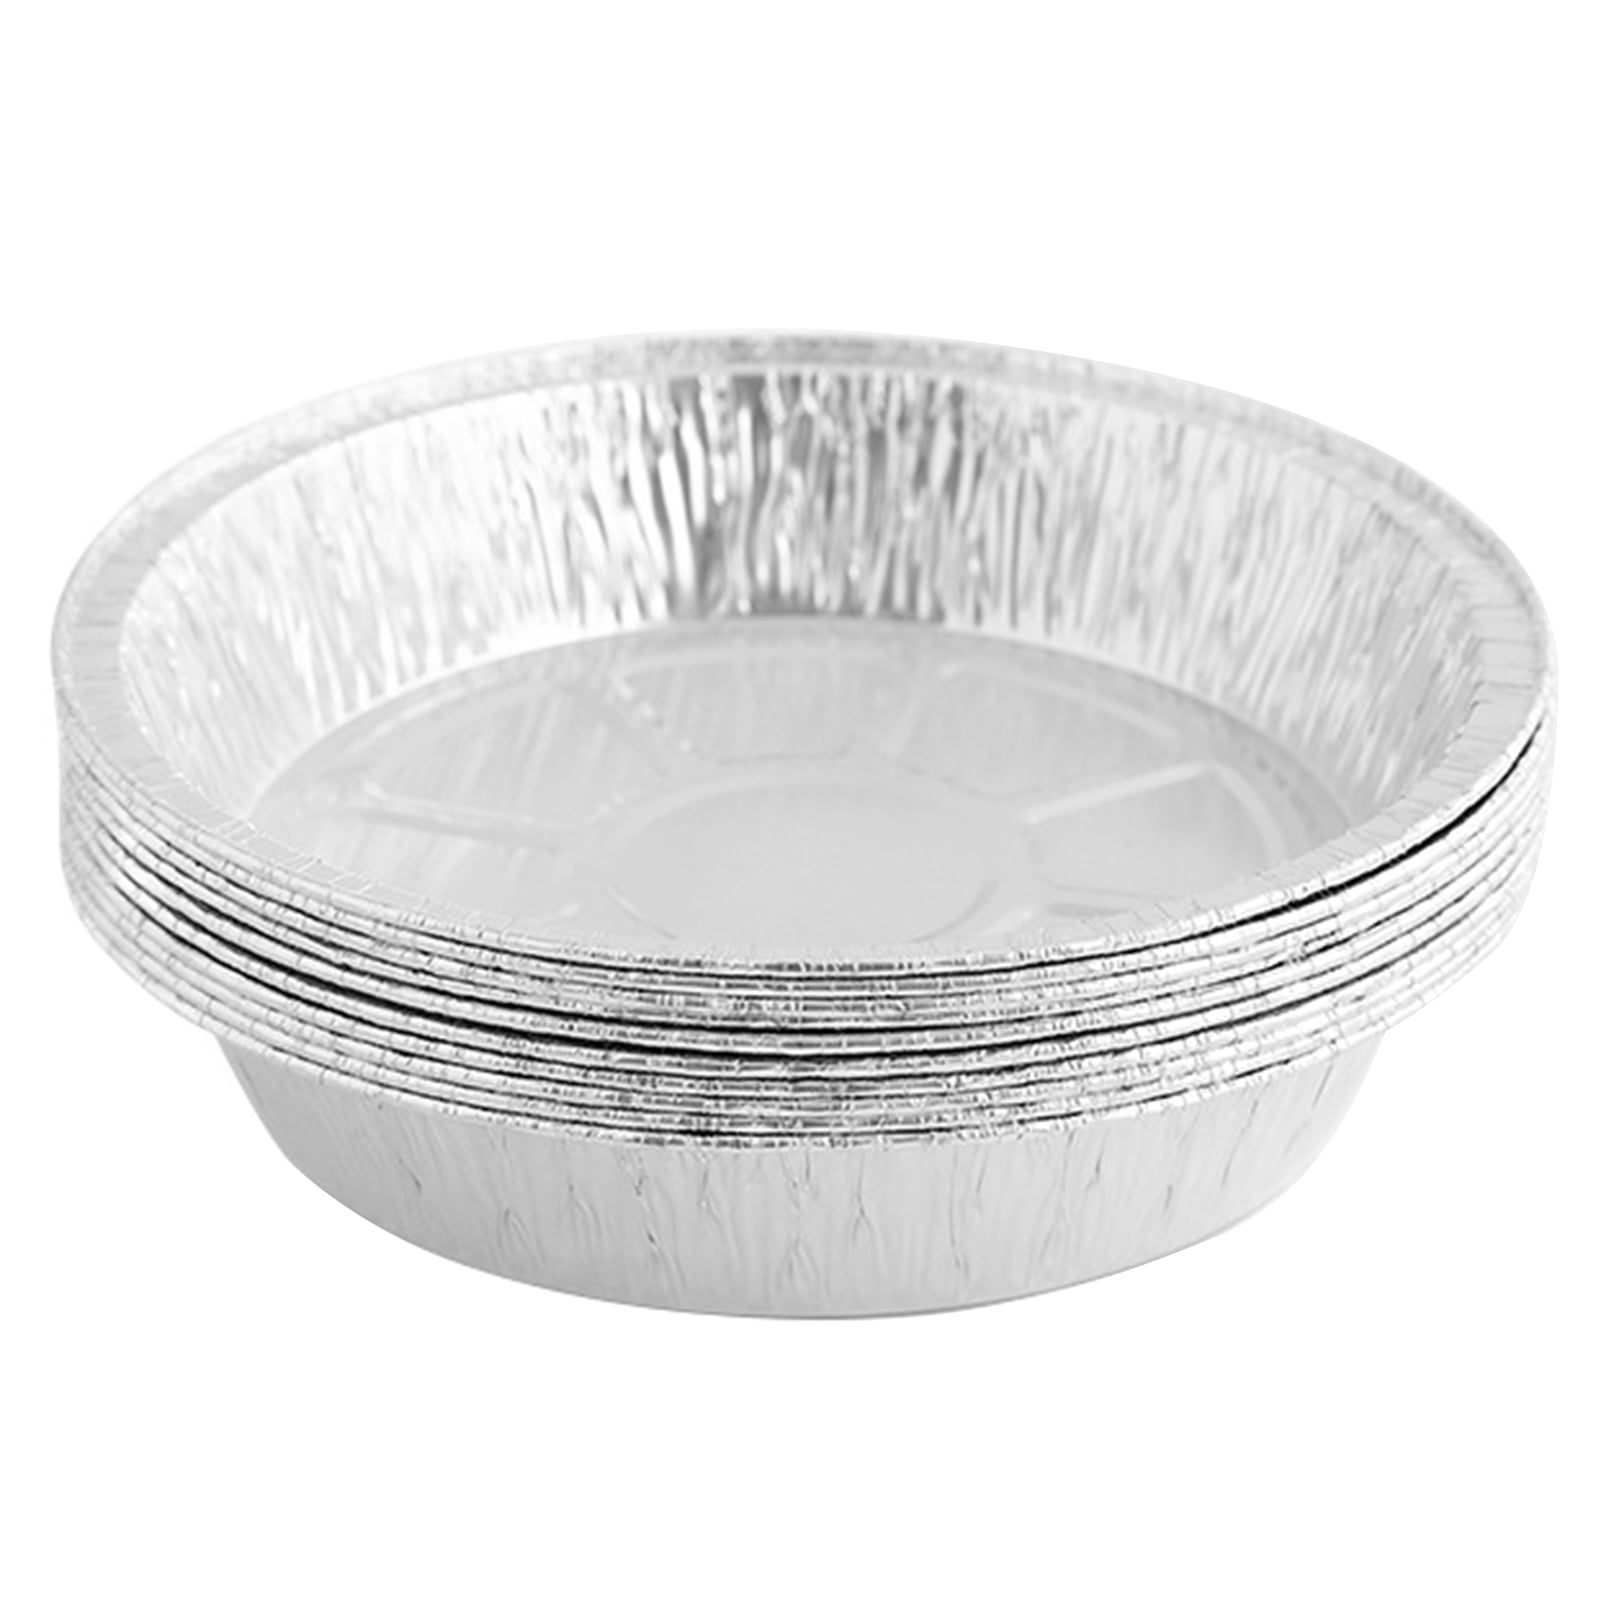 Plasticpro 6'' Inch Round Tin Foil Cake Pans Disposable Aluminum, Freezer &  Oven Safe - For Baking, Cooking, Storage, Roasting, & Reheating, Pack of